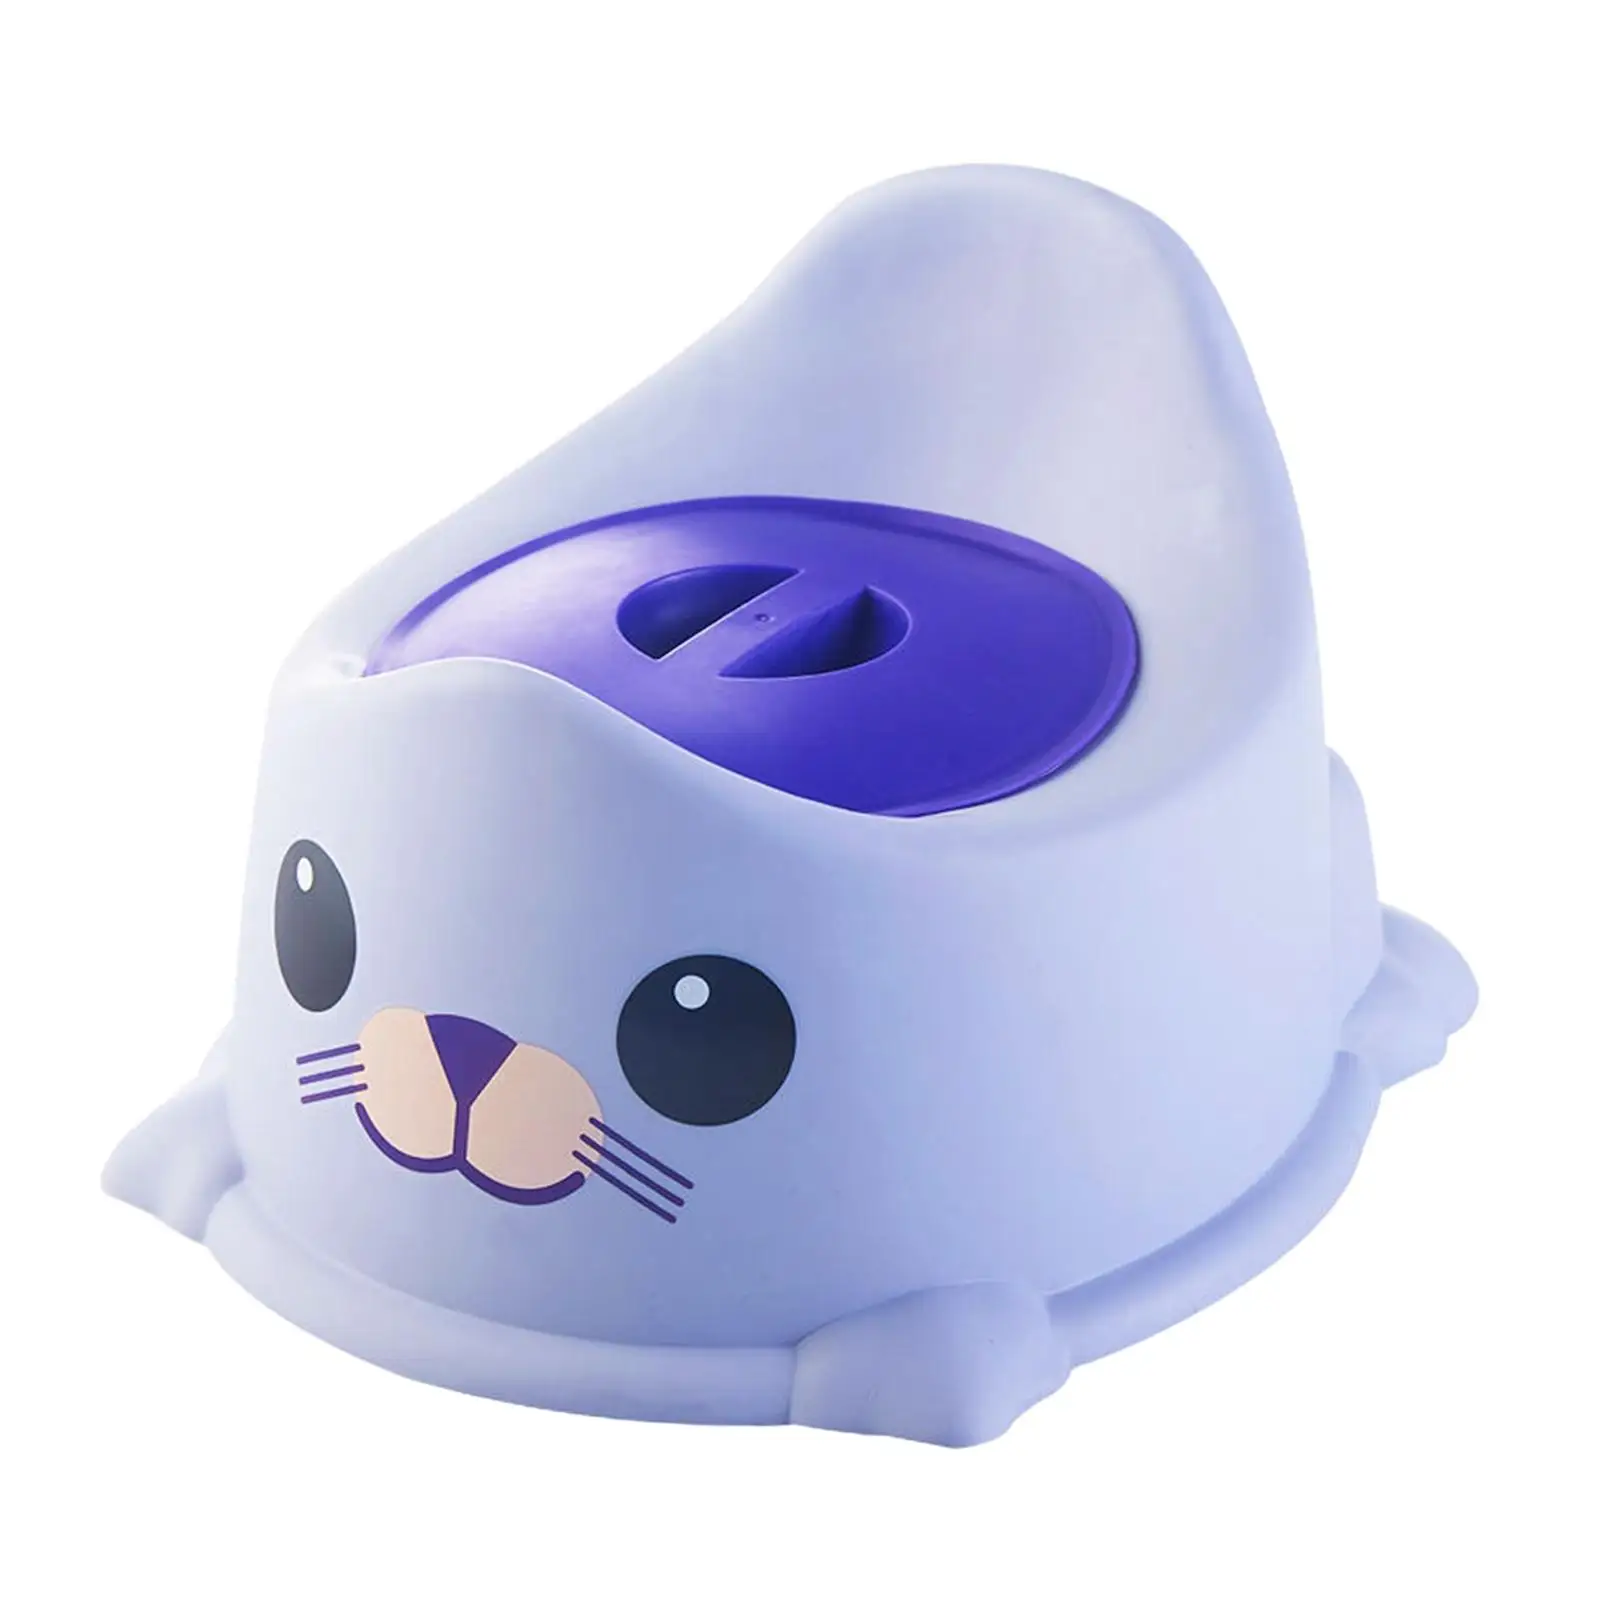 Baby Potty Training Chair Travel Easy to Clean AntiSlip with Lid for Boys Girls with Handle Splashing Guard Lovely Animal Potty